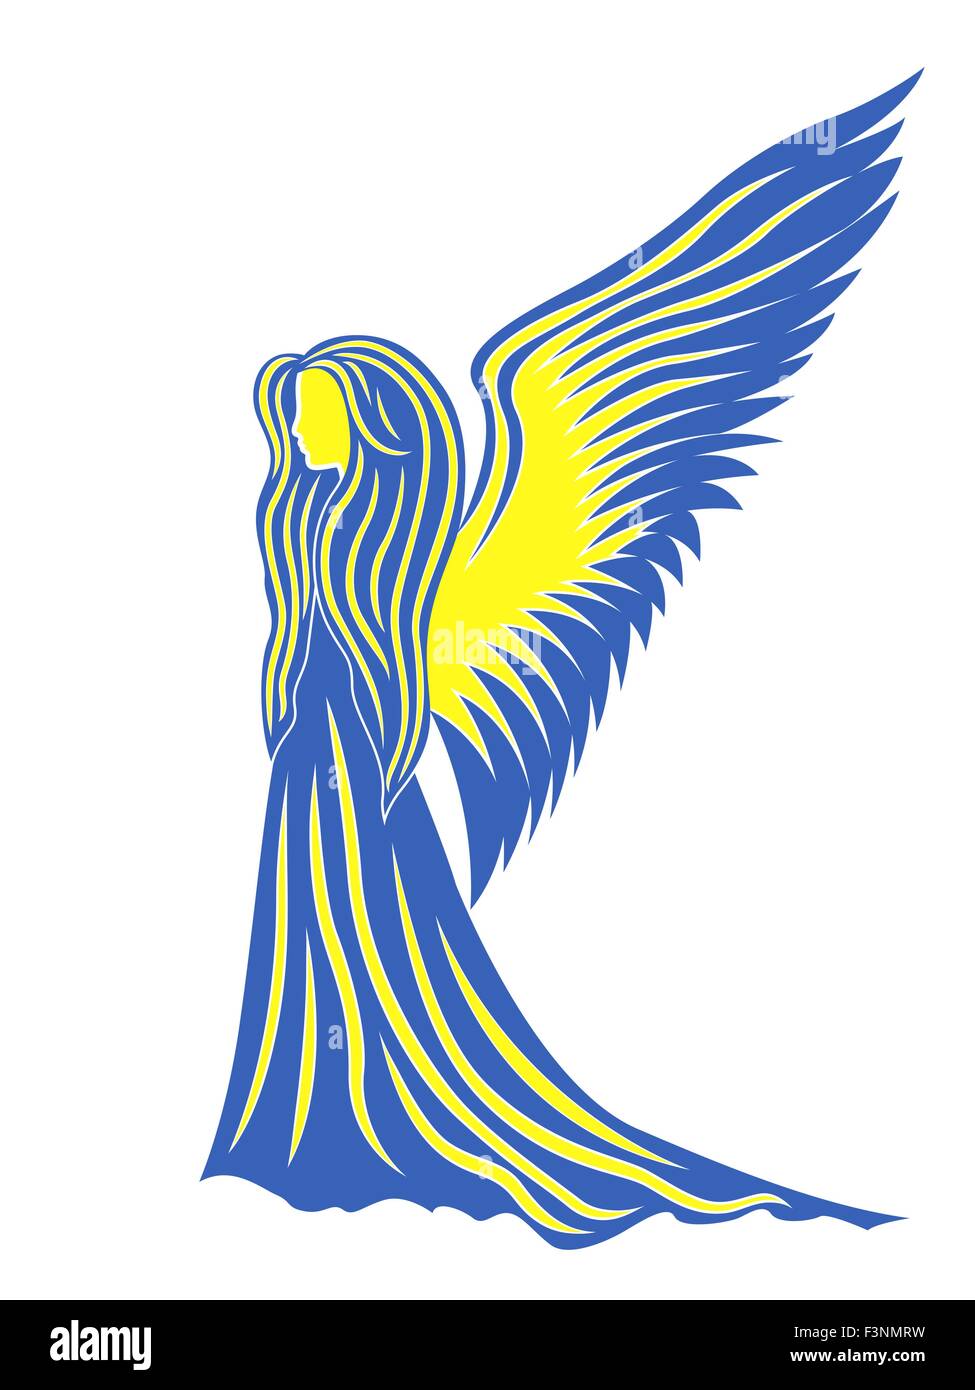 Female angel in yellow and blue; these colors symbolize the Ukraine. Hand drawing vector illustration Stock Vector